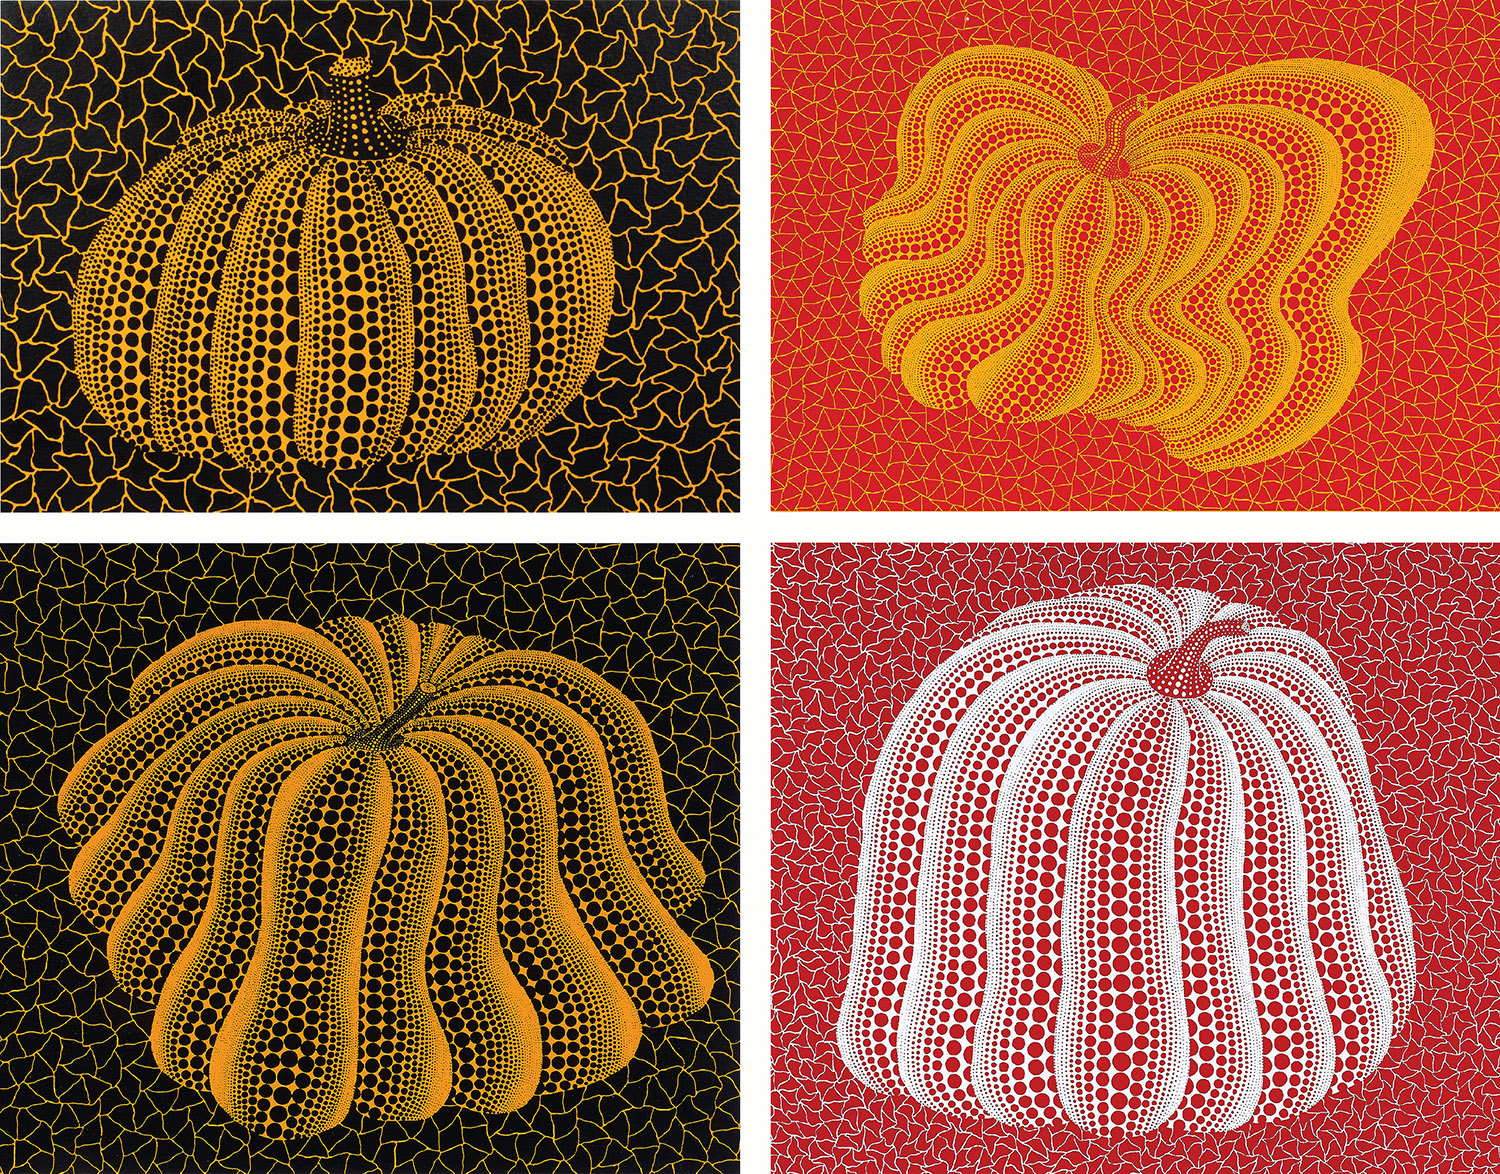 Yayoi Kusama Prints from the September 16th Sale